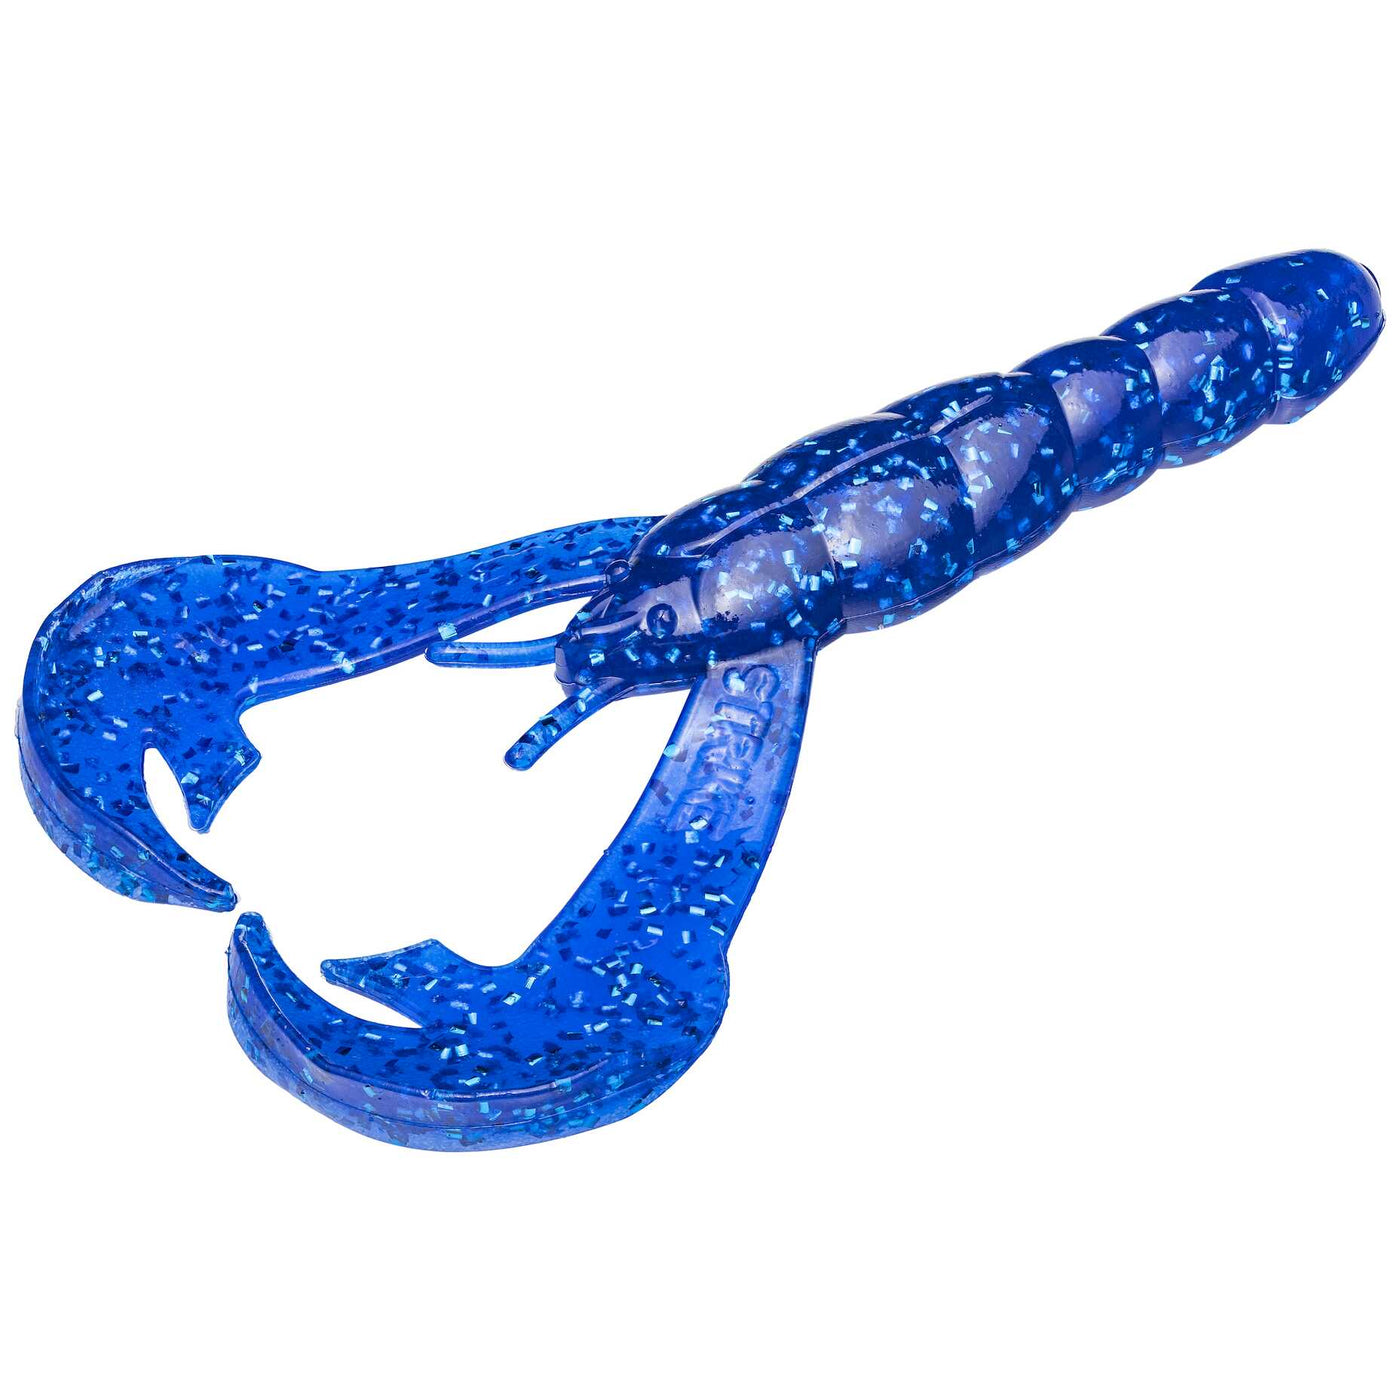 Rage Tail Craw Lure Strike King Lure Company 4 in Blue Sapphire 